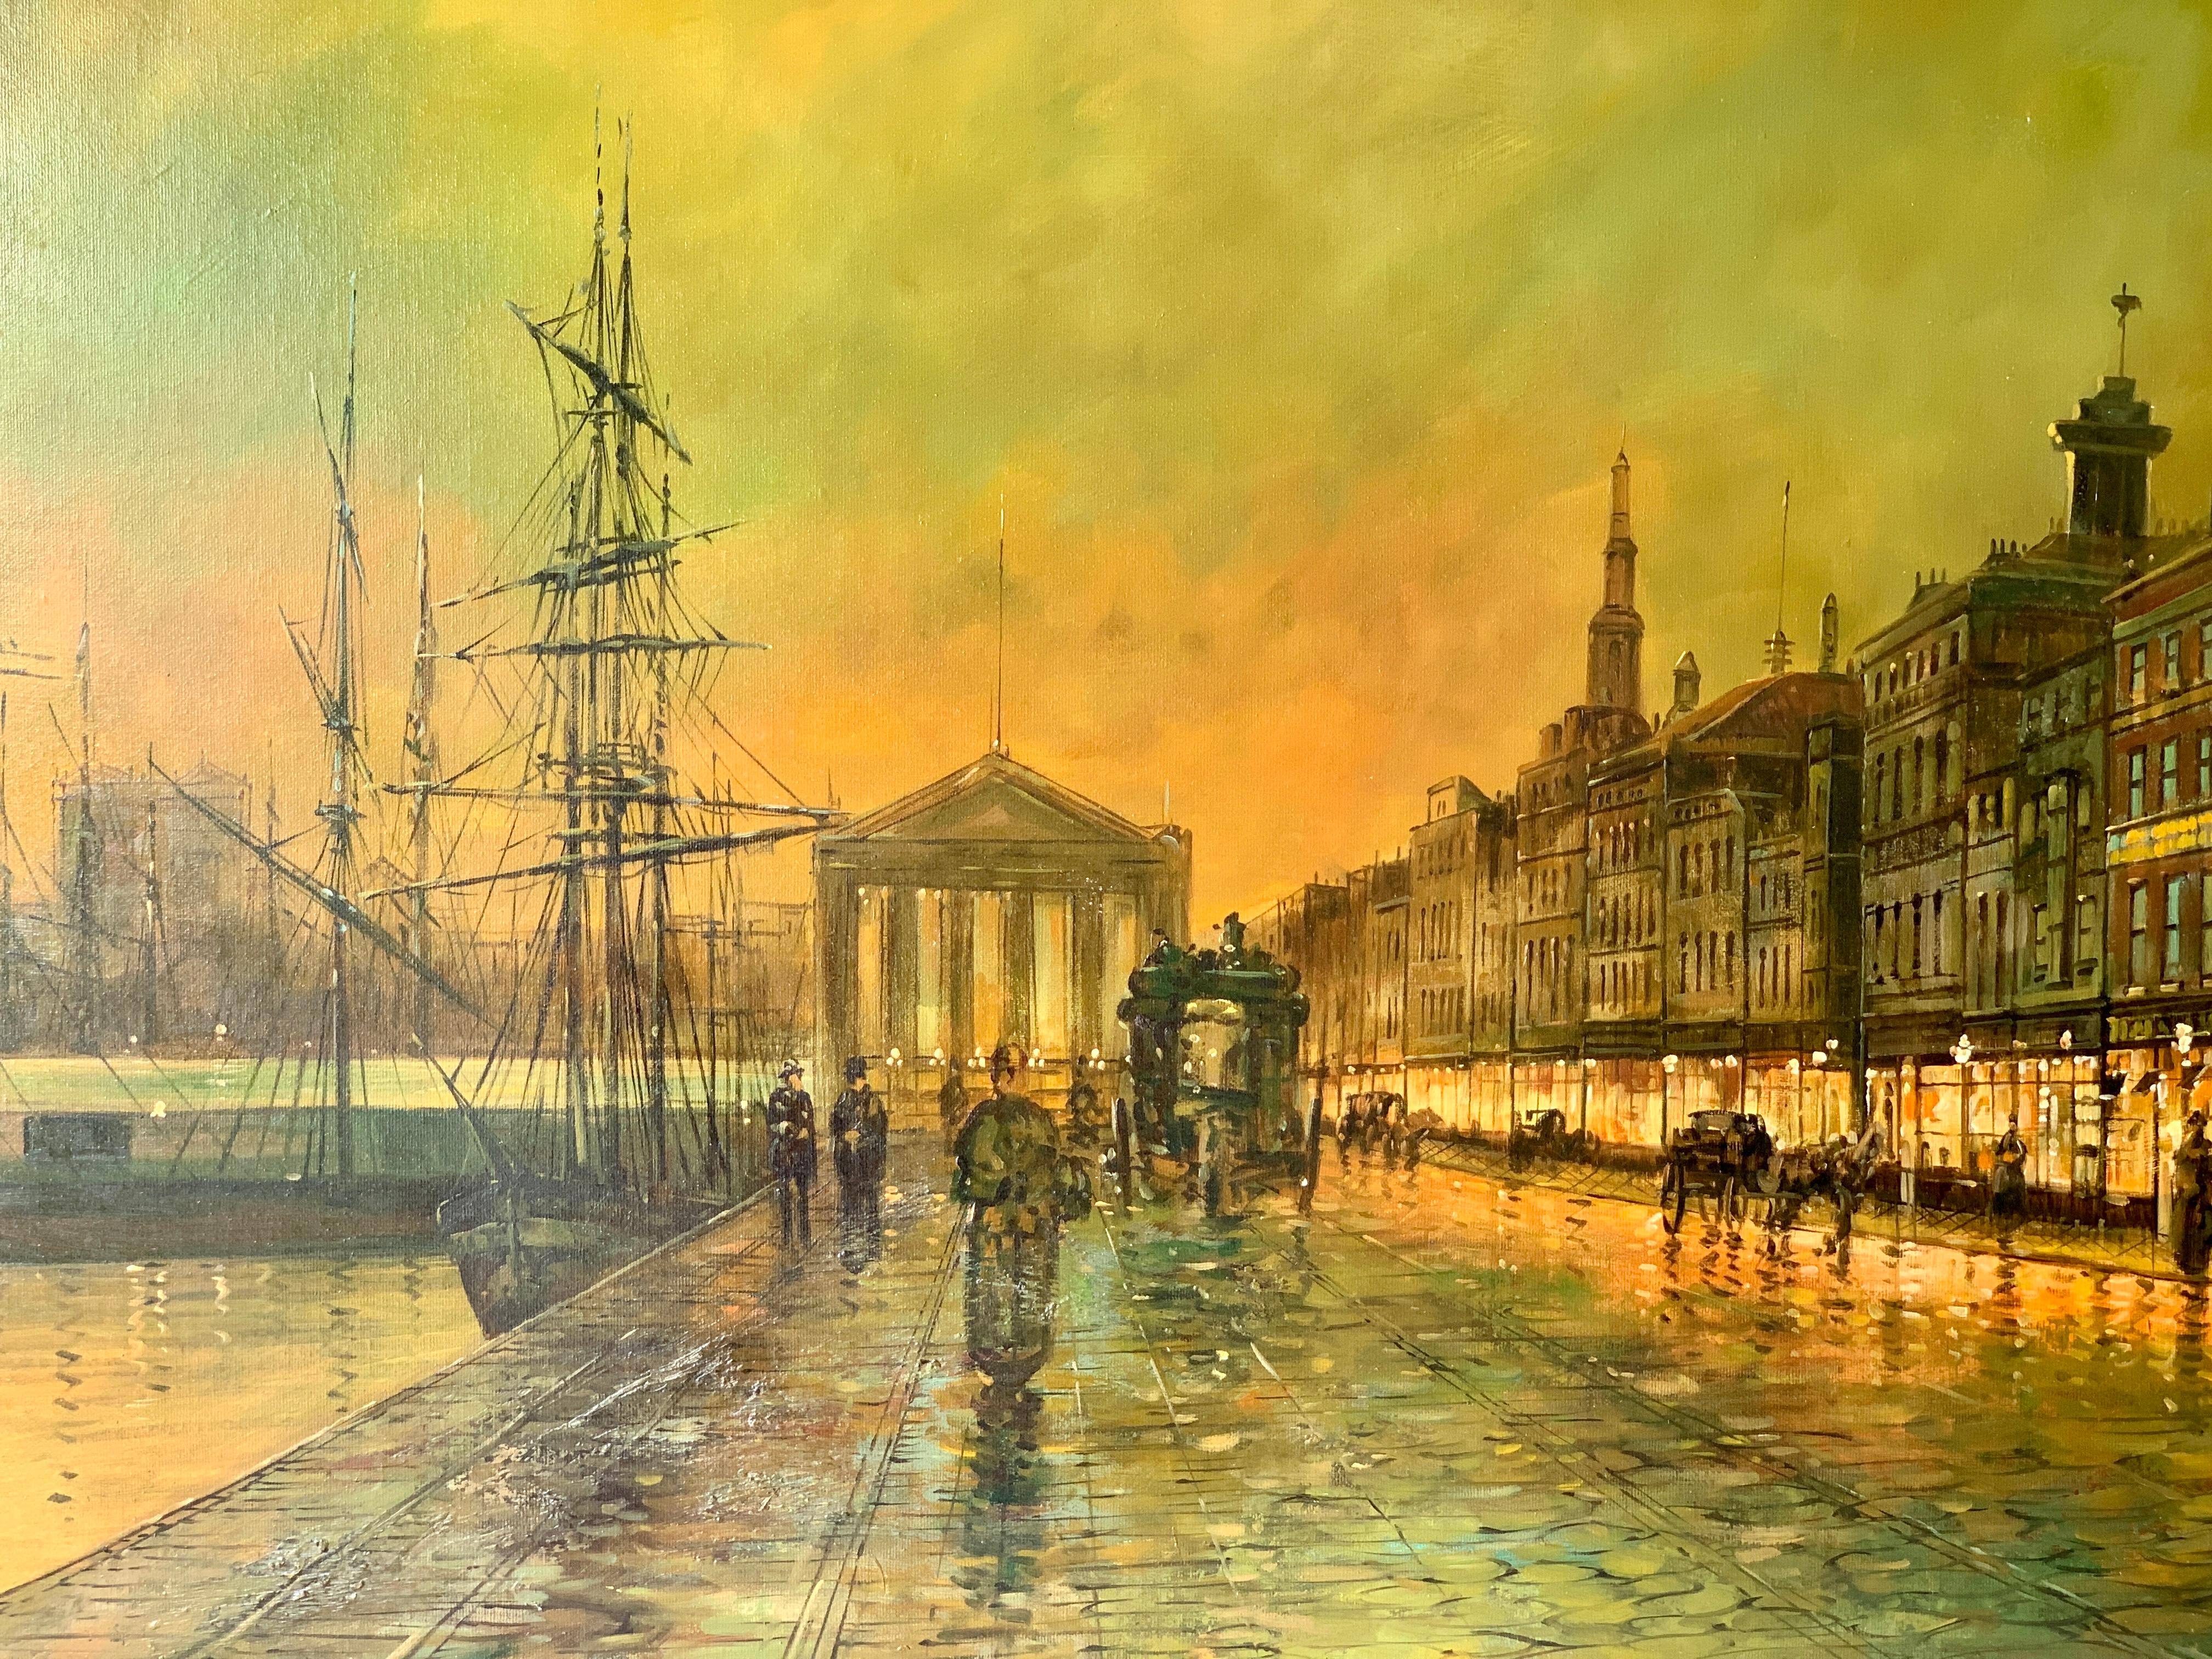 View of a harbor or Port at night, with the Liverpool Custom House. - Painting by John Atkinson Grimshaw